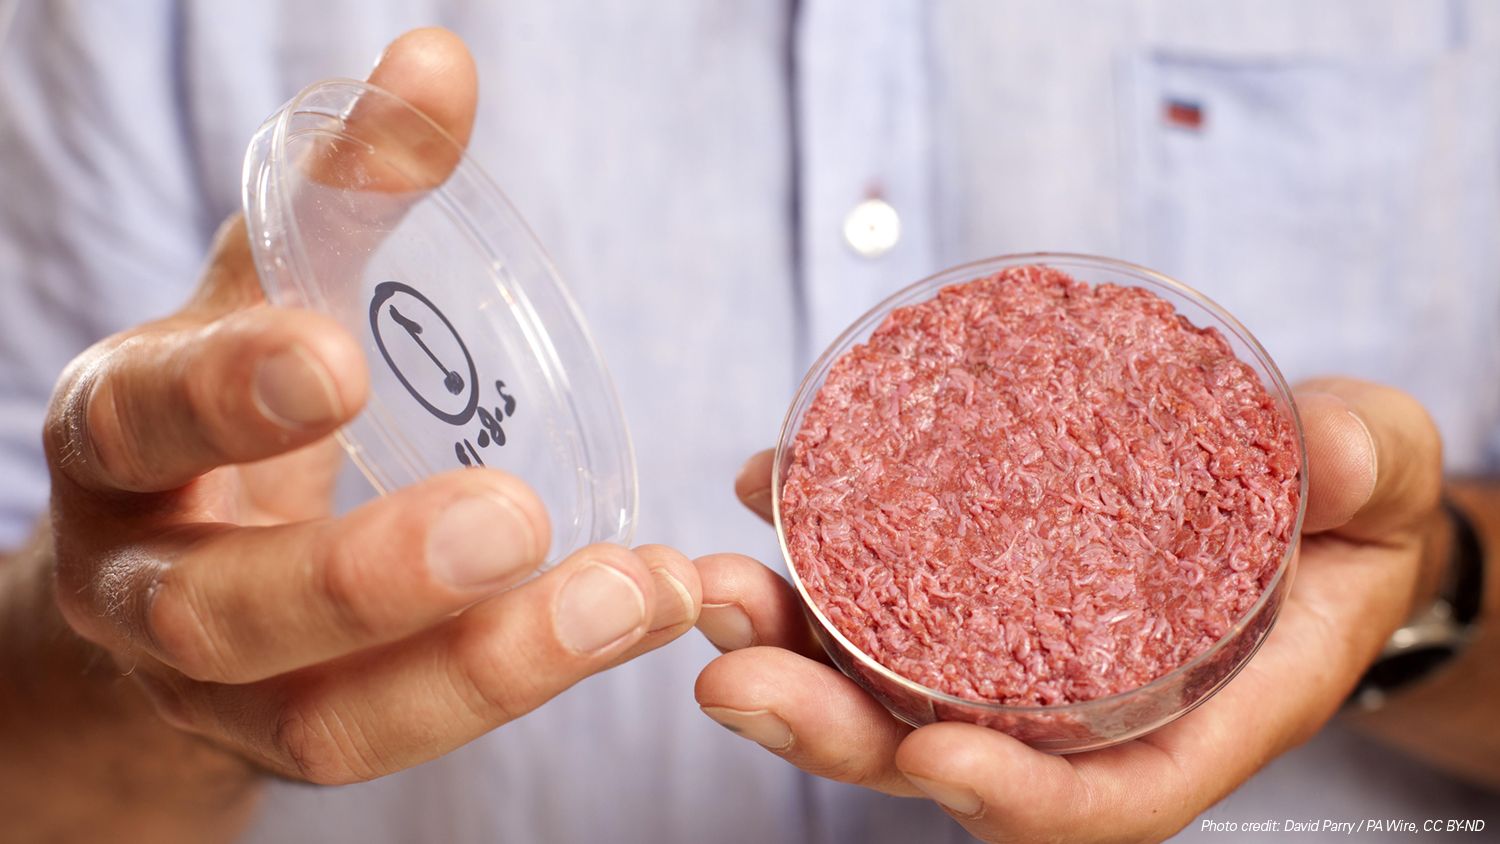 two hands holding cultured beef in a petri dish and the petri dish lid, photo credit David Parry PA Wire